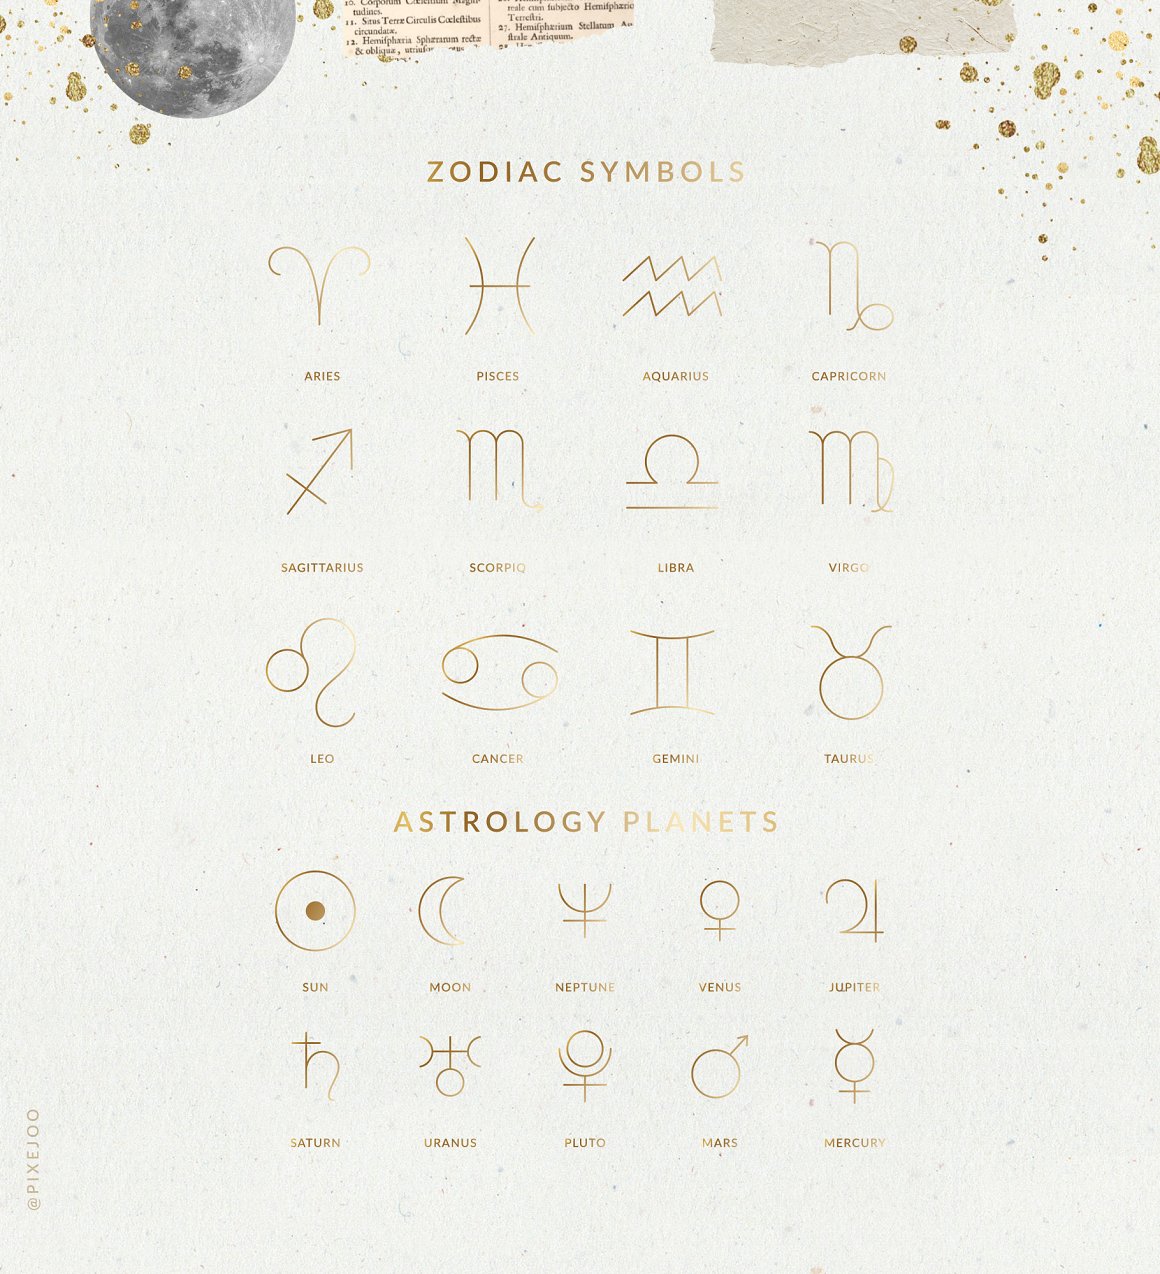 A golden set of zodiac symbols and astrology planets on a gray background.